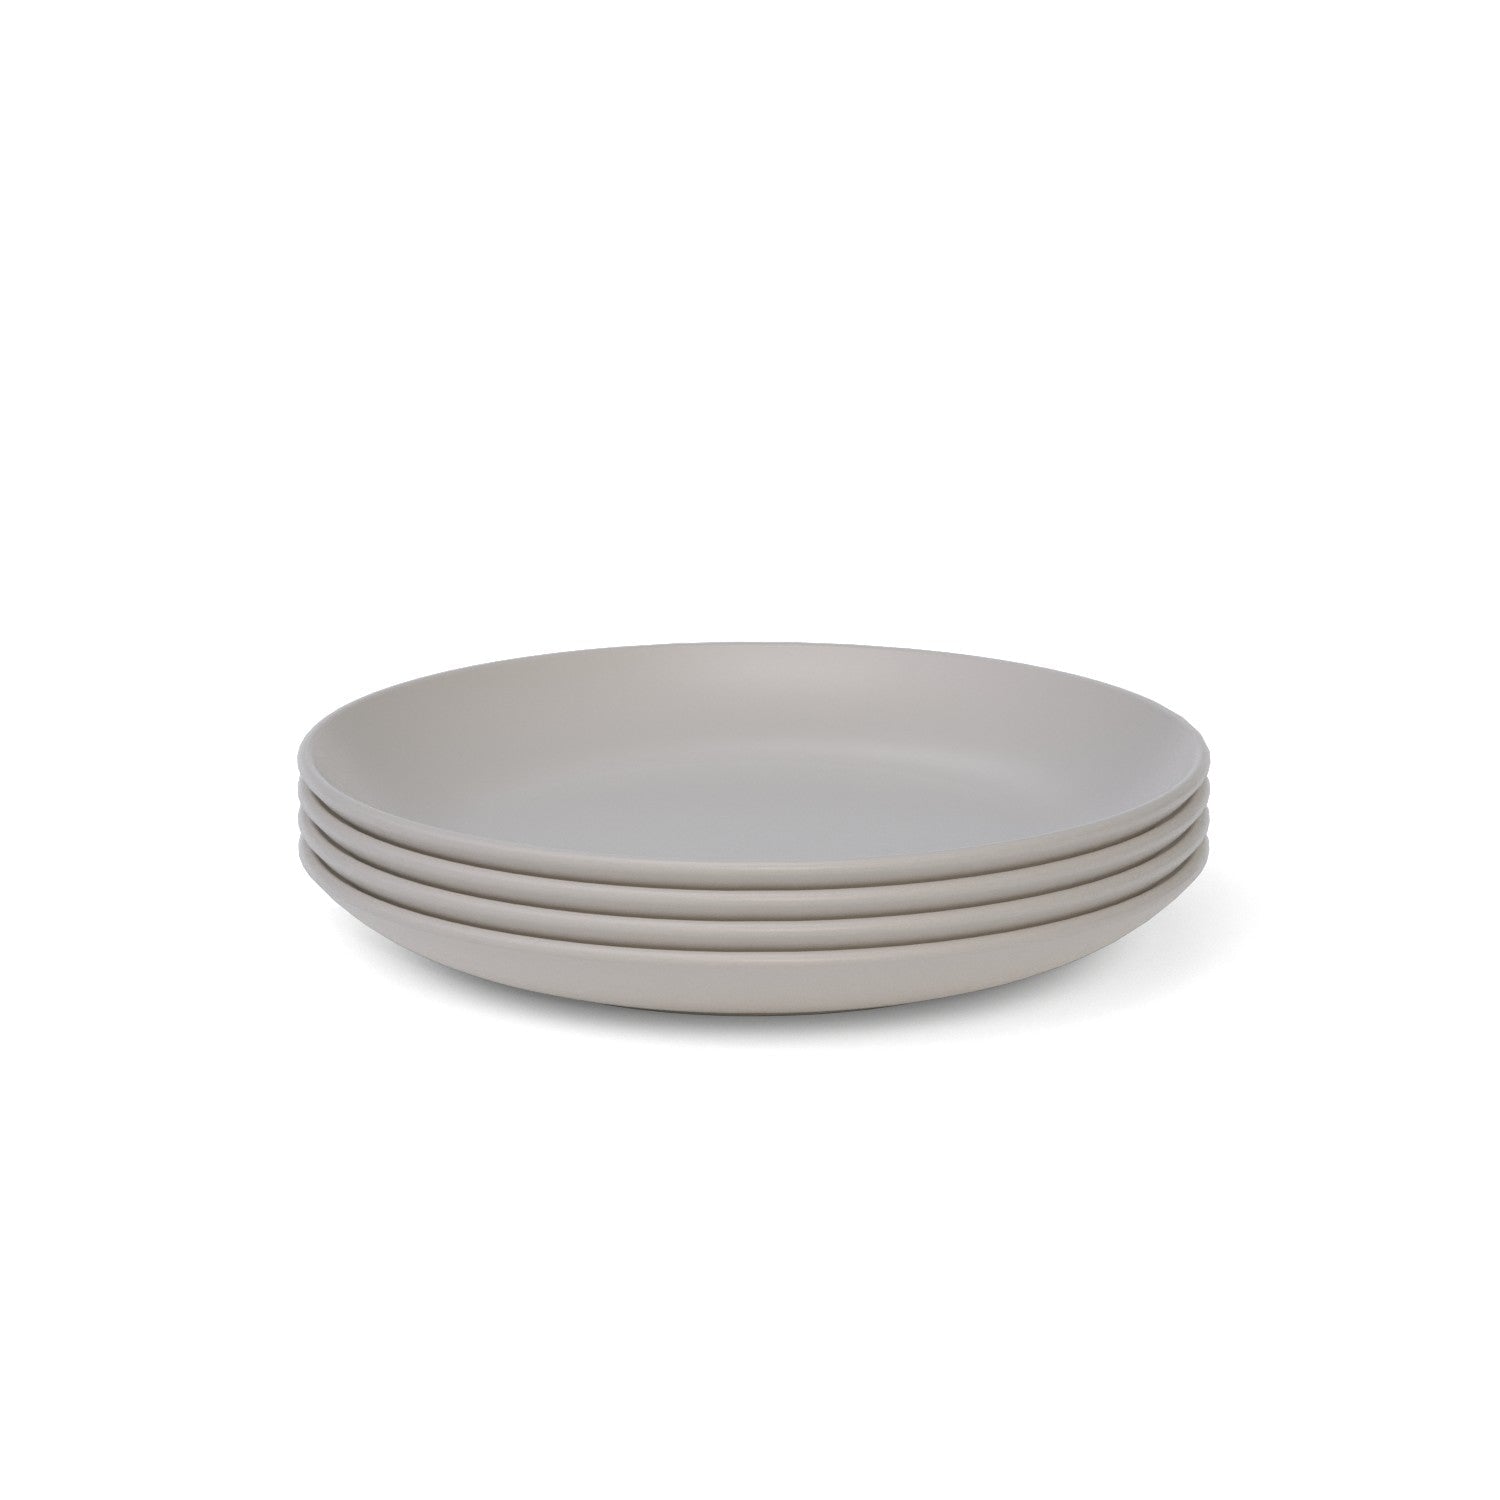 8 " Round Side Plate Set of 4 - Stone